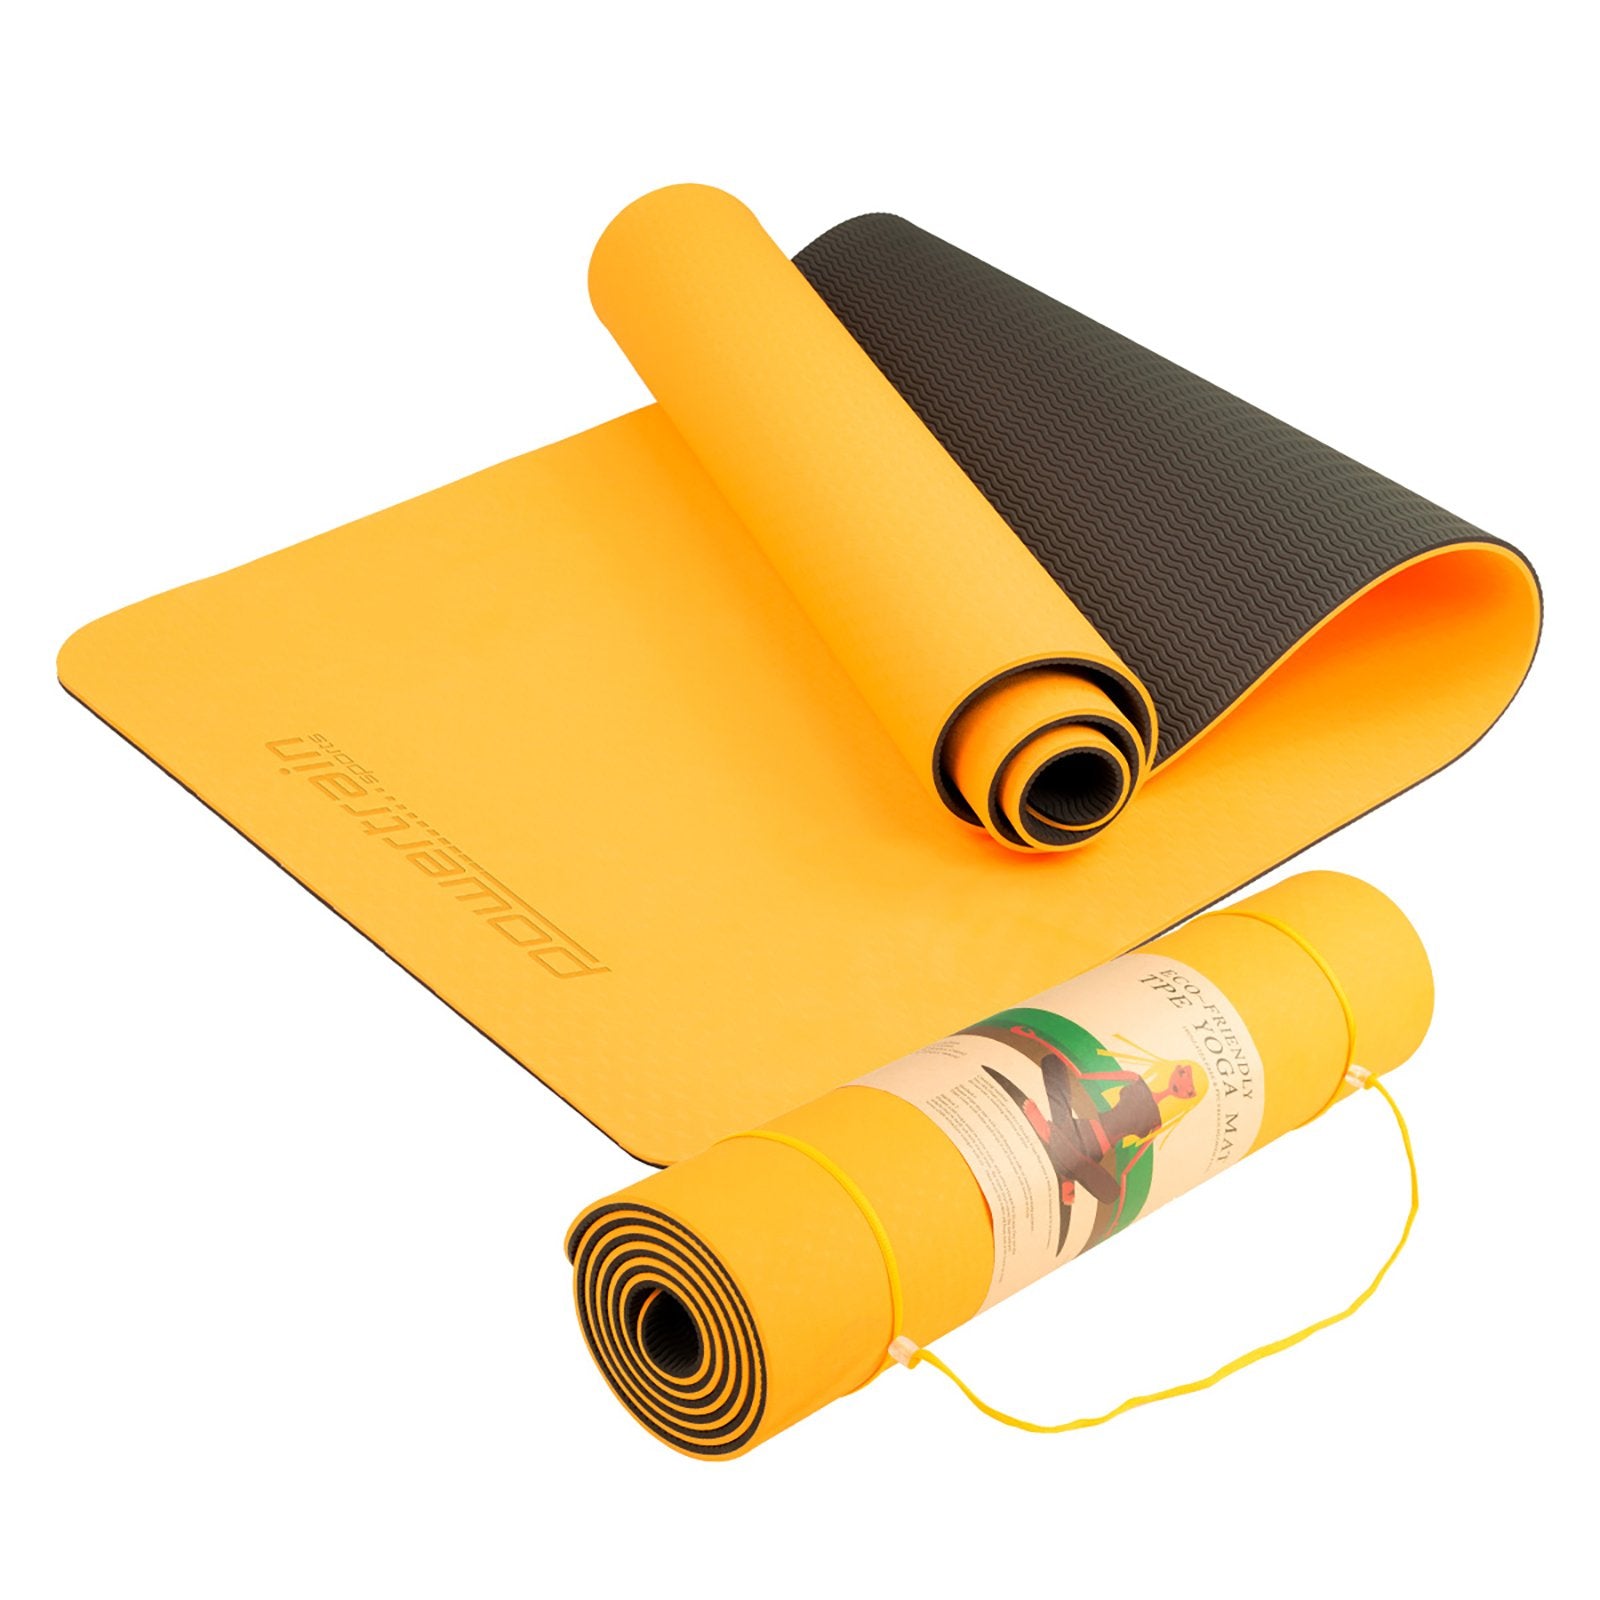 Eco-friendly Dual Layer 8mm Yoga Mat | Orange | Non-slip Surface And Carry Strap For Ultimate Comfort And Portability